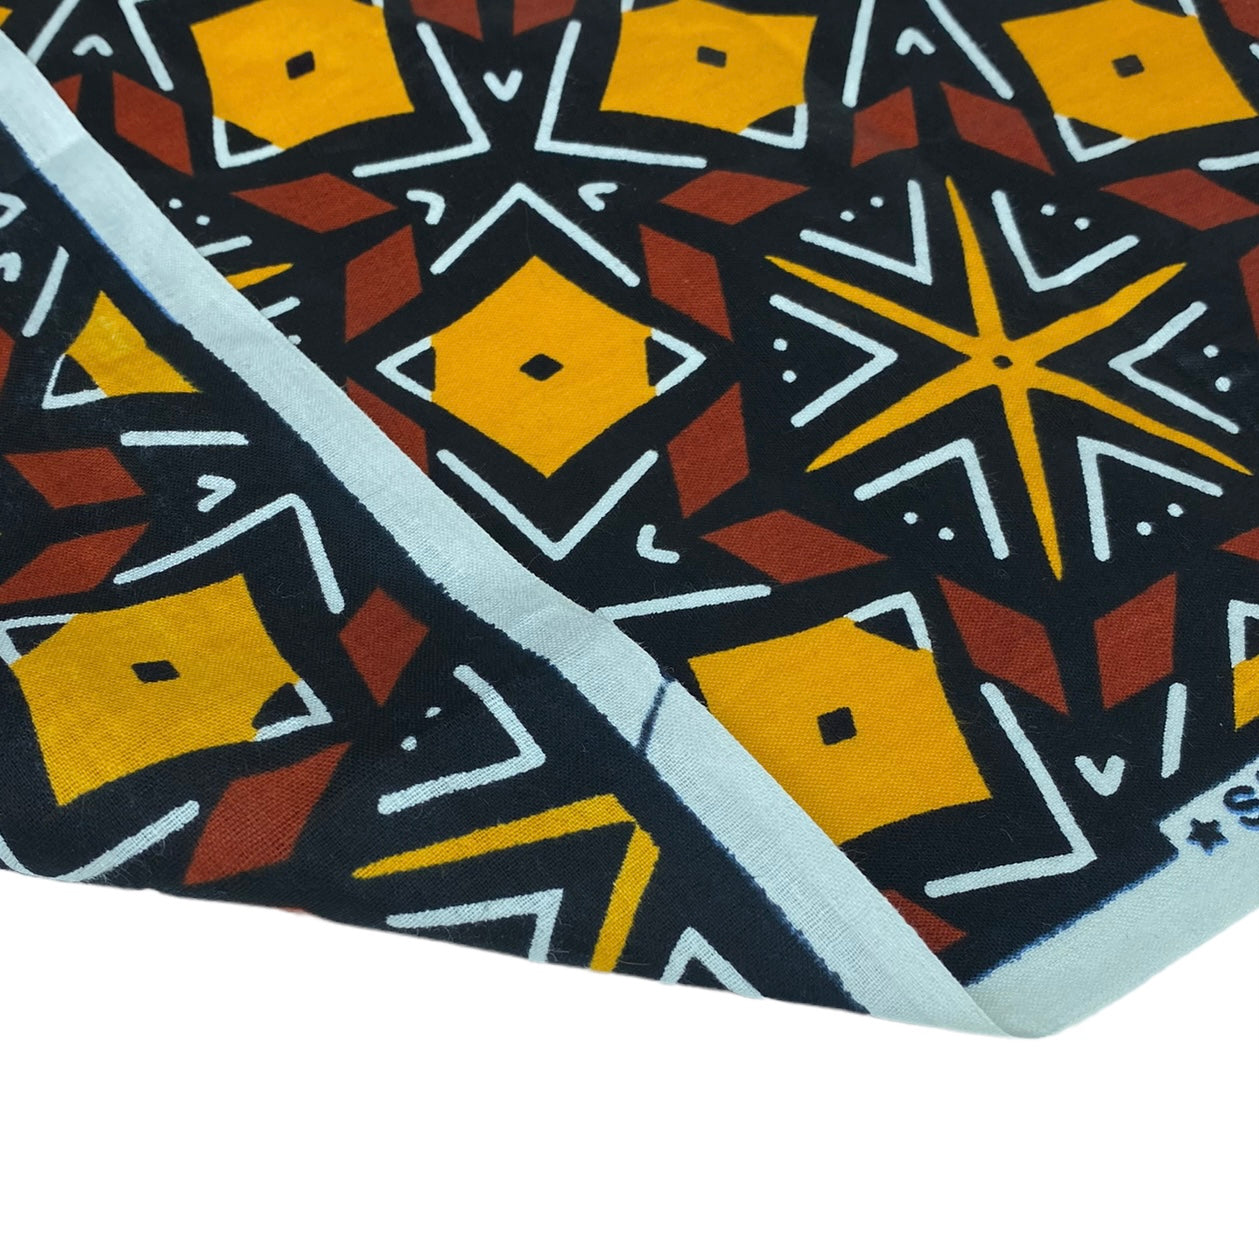 Waxed African Printed Cotton - Black / Yellow / Brown